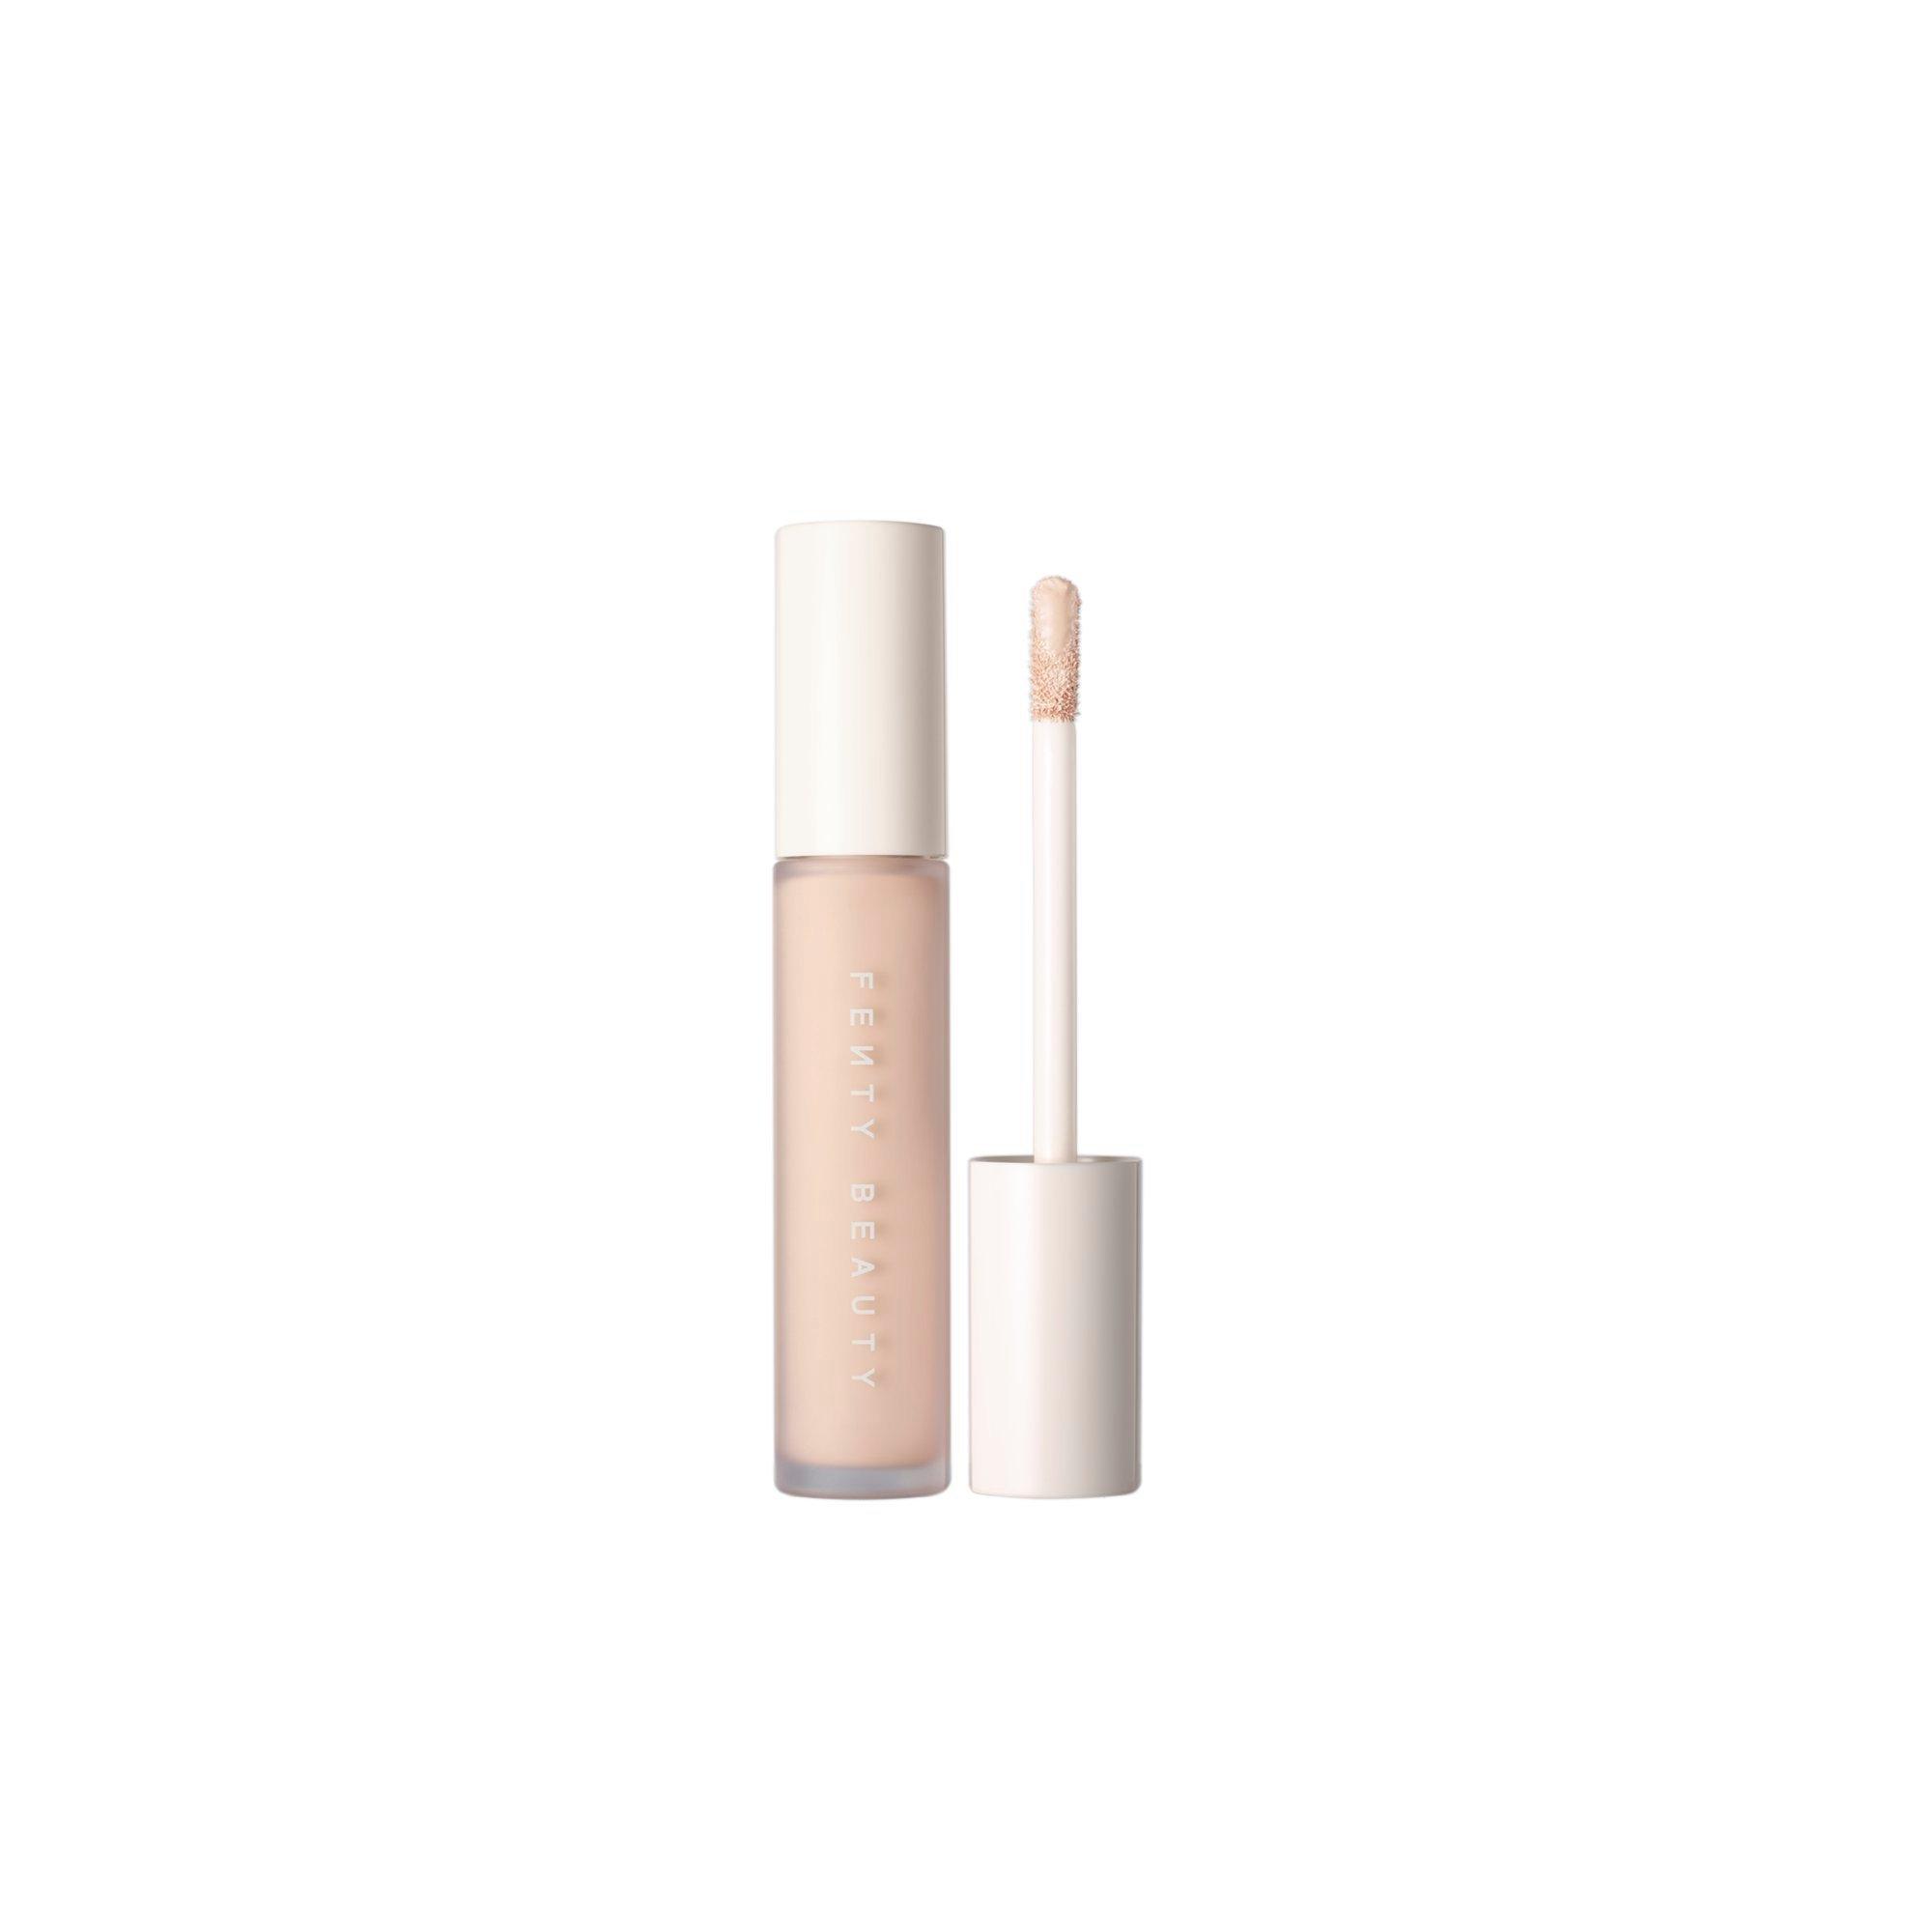 Image of Fenty Beauty By Rihanna Pro Filt'r Instant Retouch Concealer - 8ml